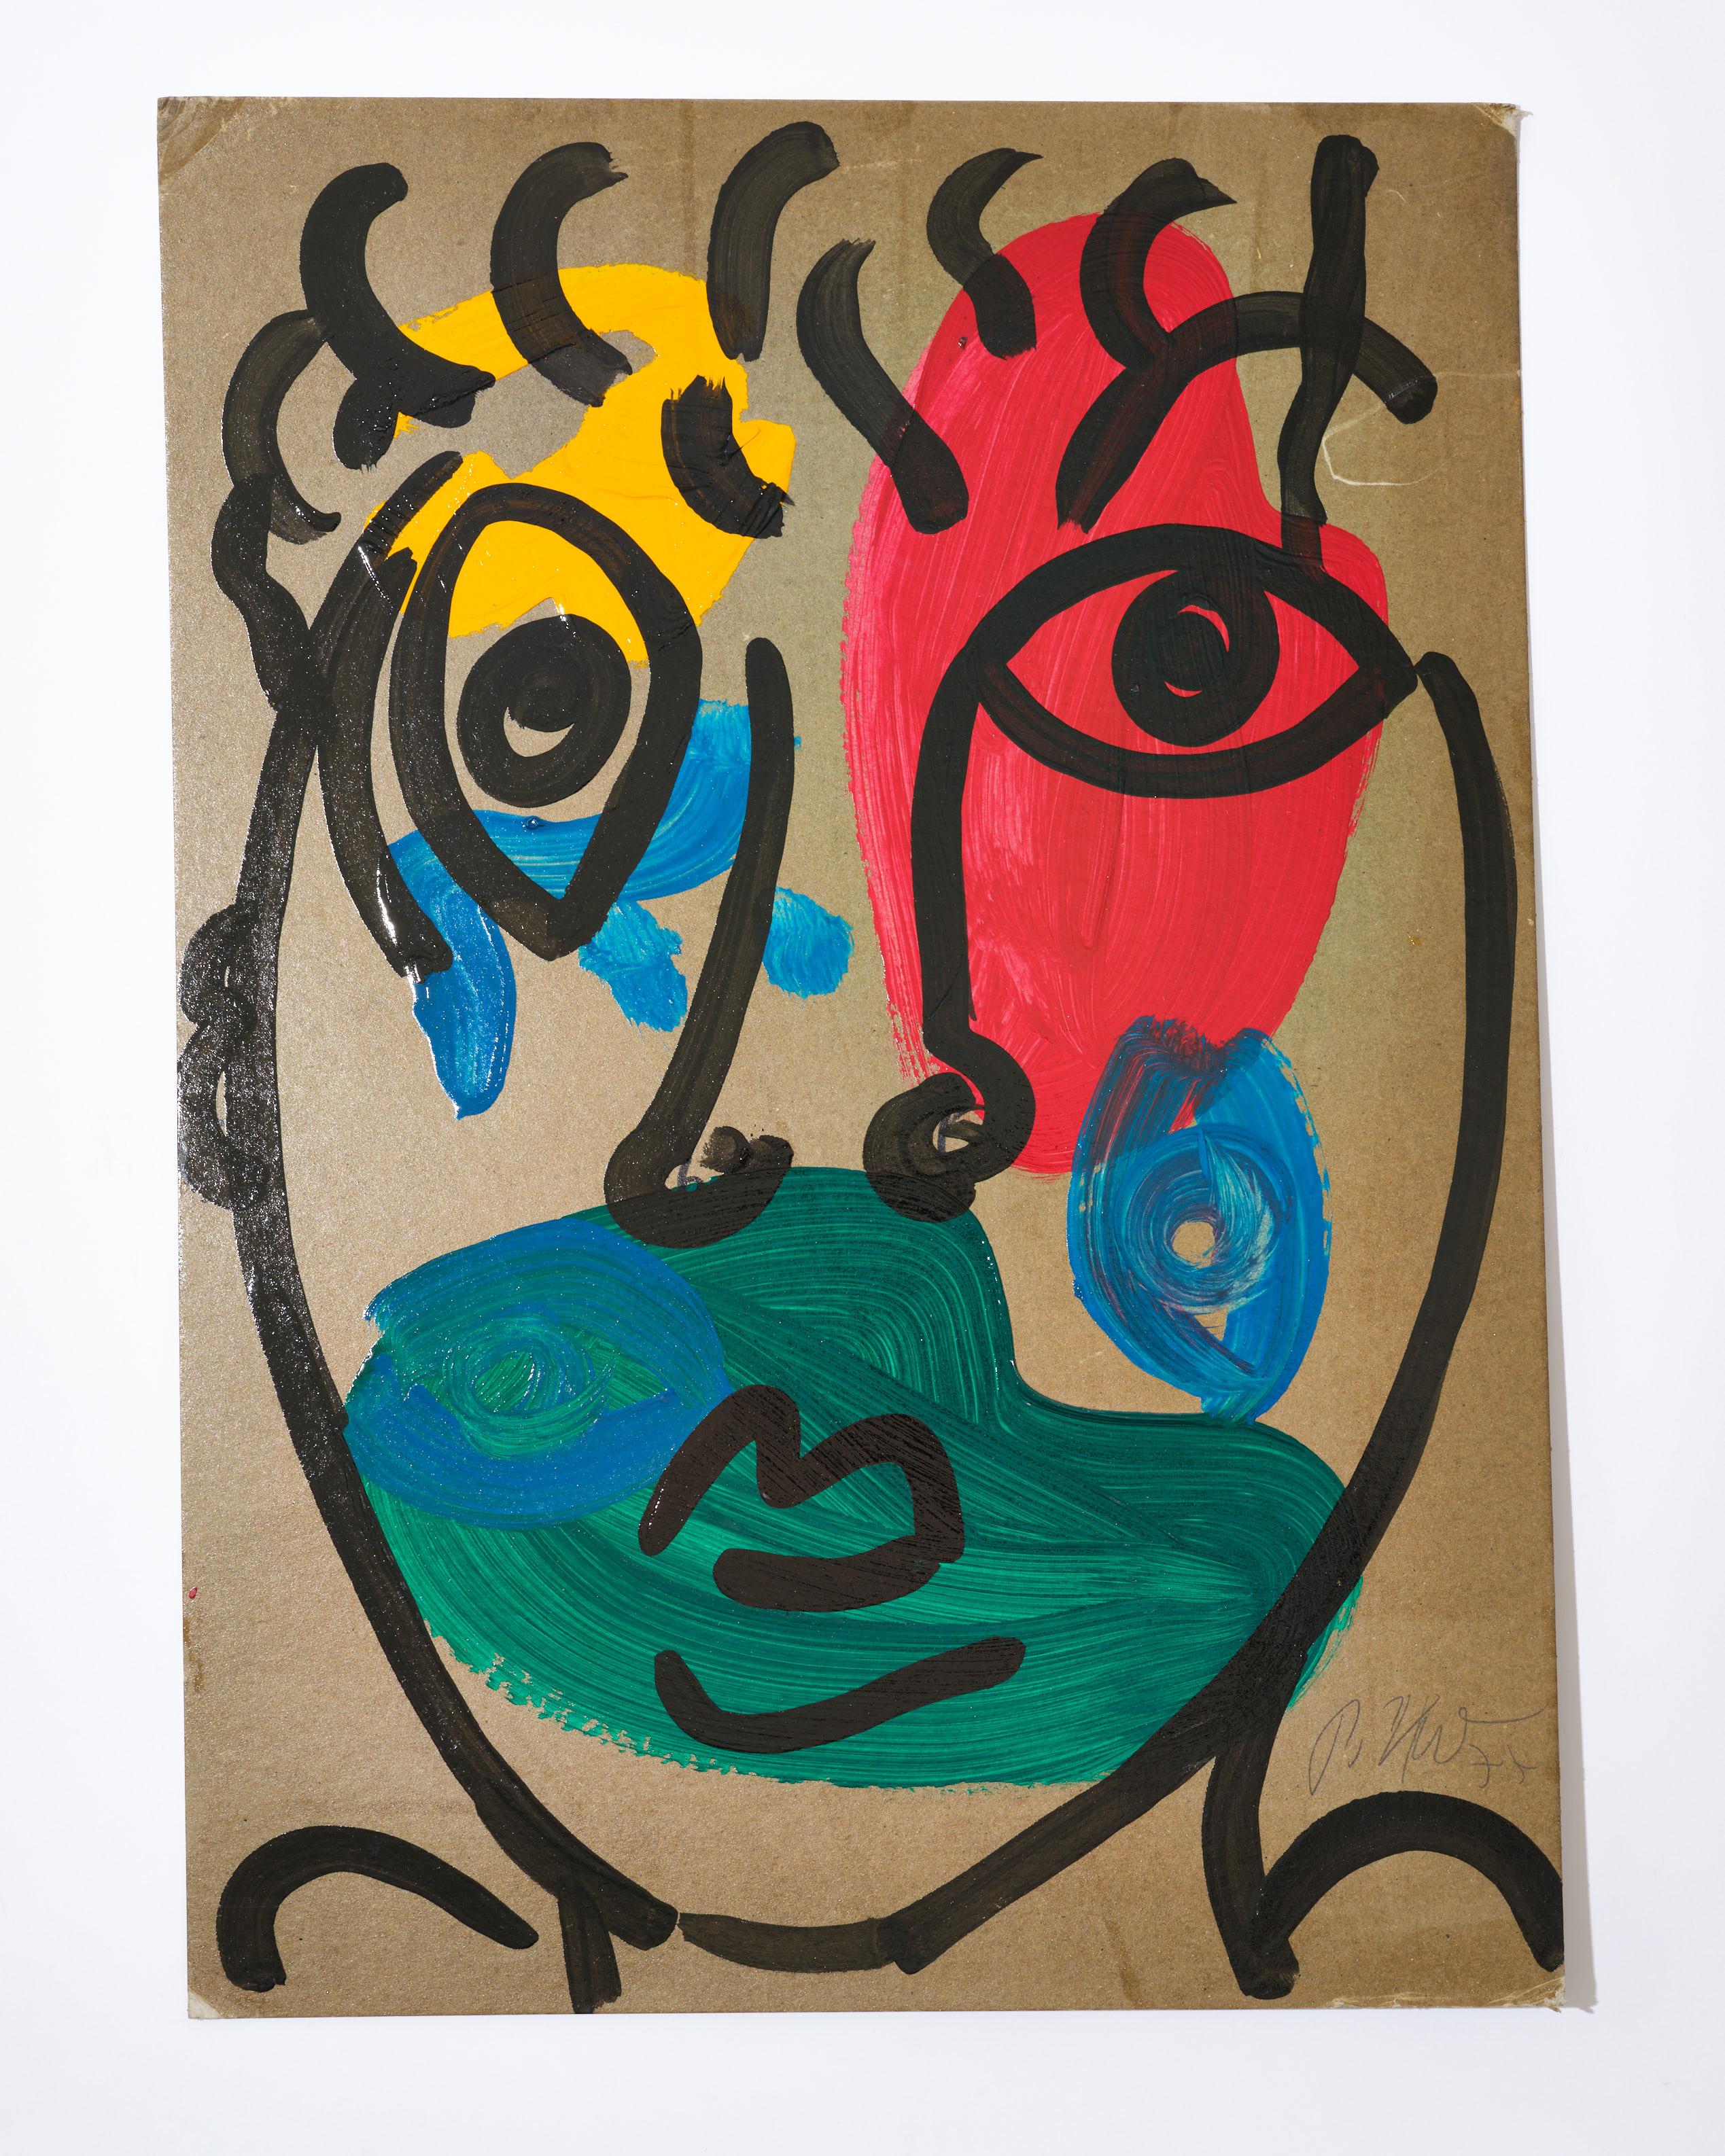 Hand-Painted Painting by Peter Keil, Acrylic On Paper, Red/Blue/Green/Yellow, C 1977, Germany For Sale